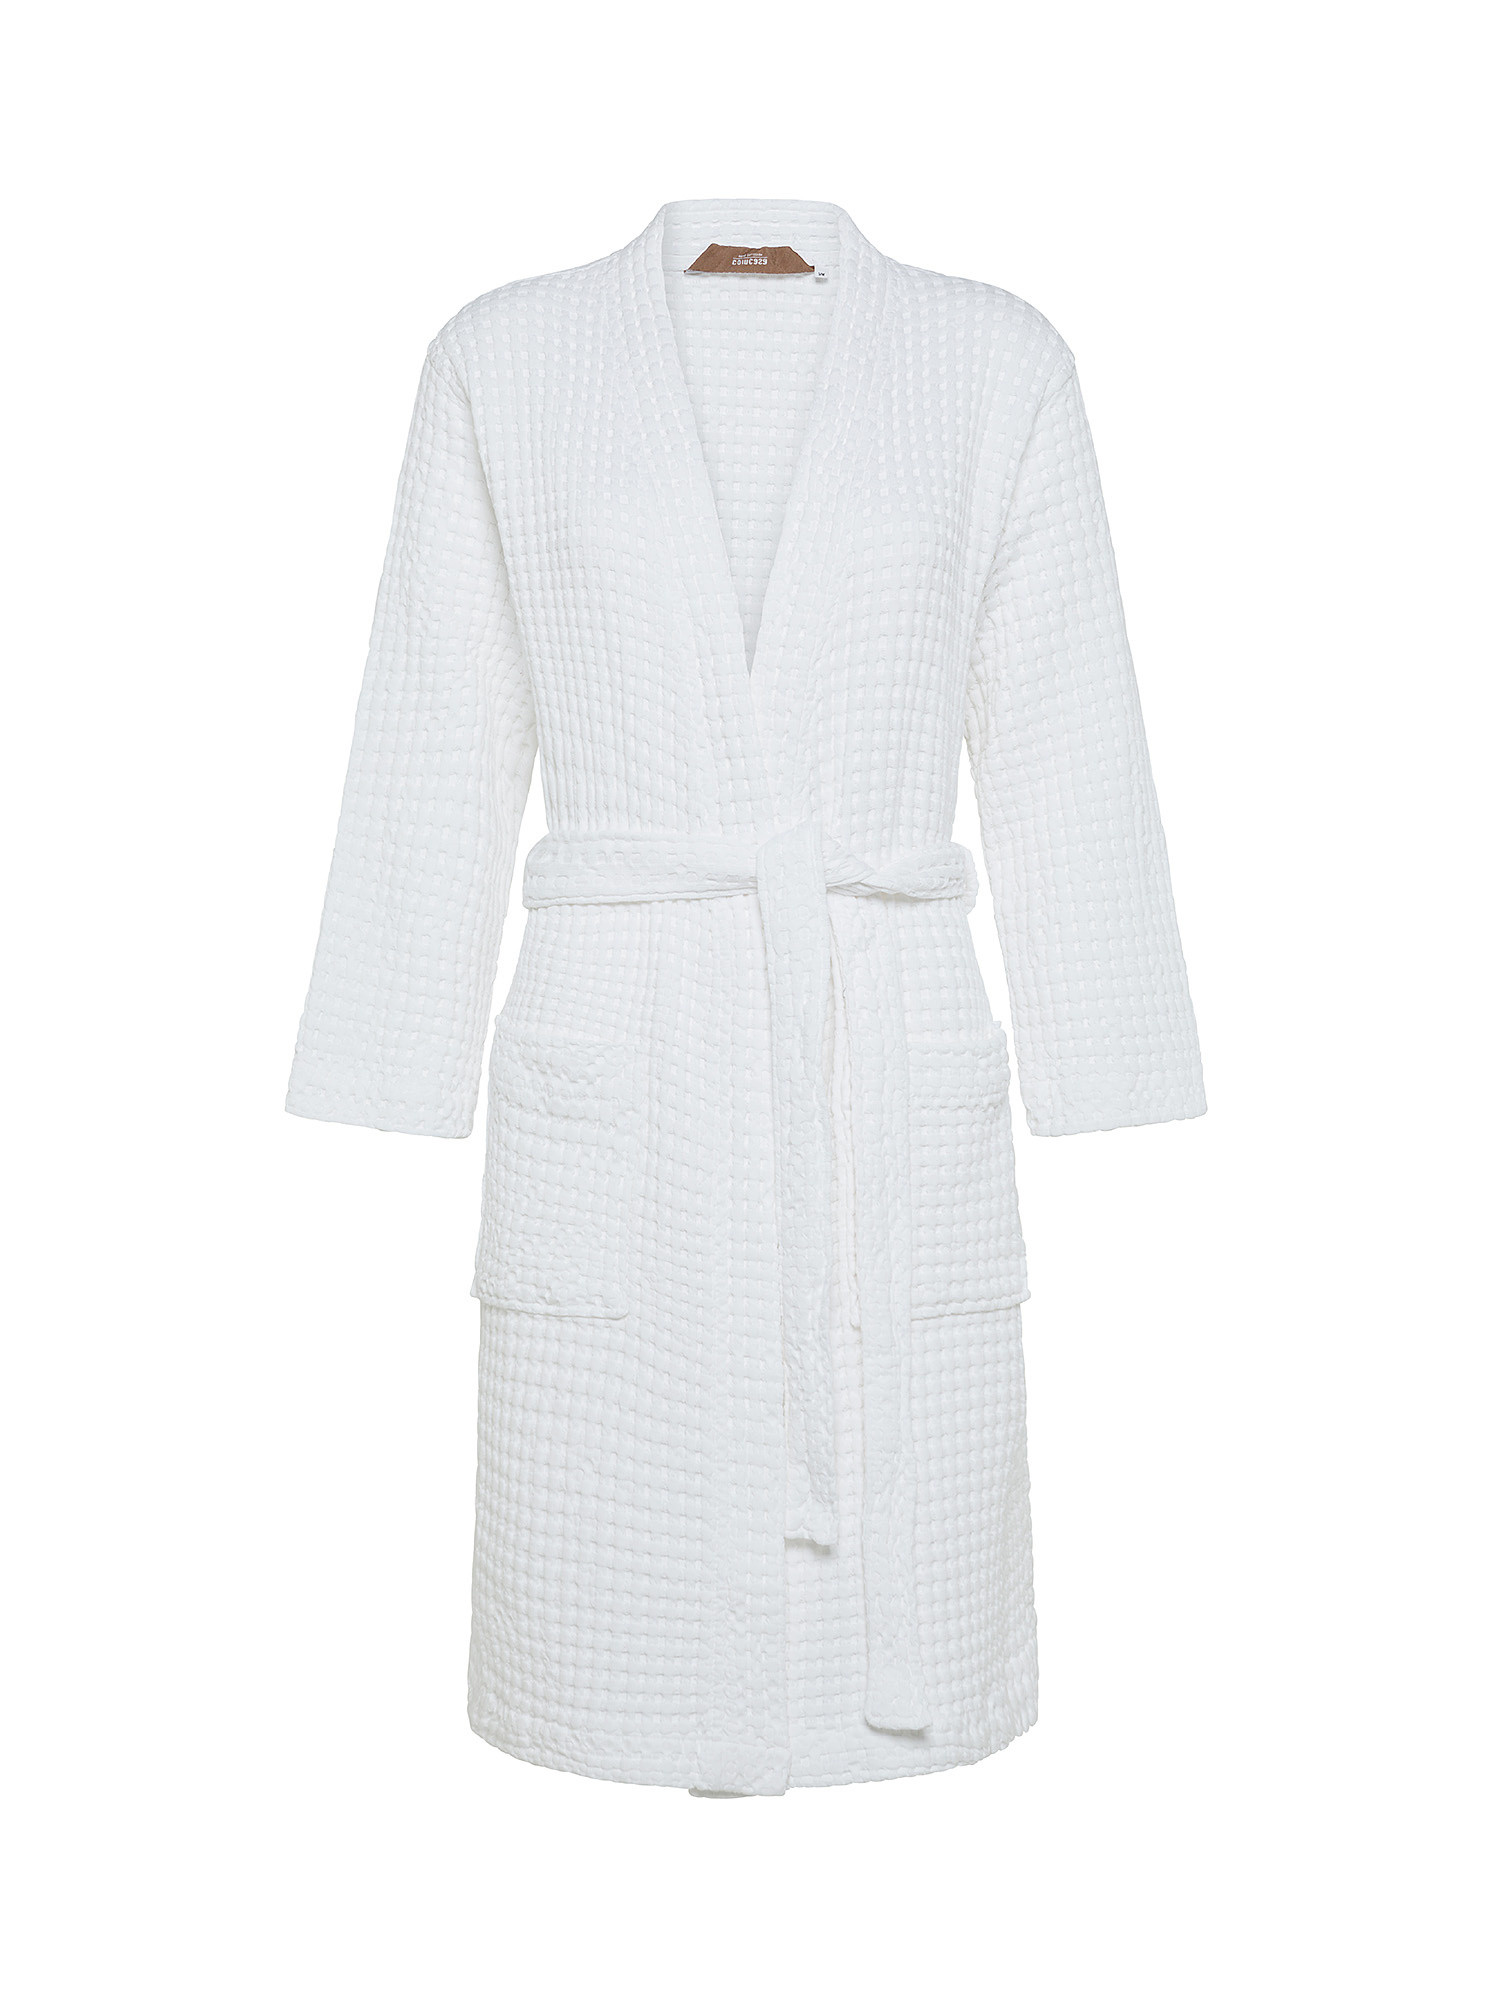 Bathrobe in pure honeycomb cotton, White, large image number 0